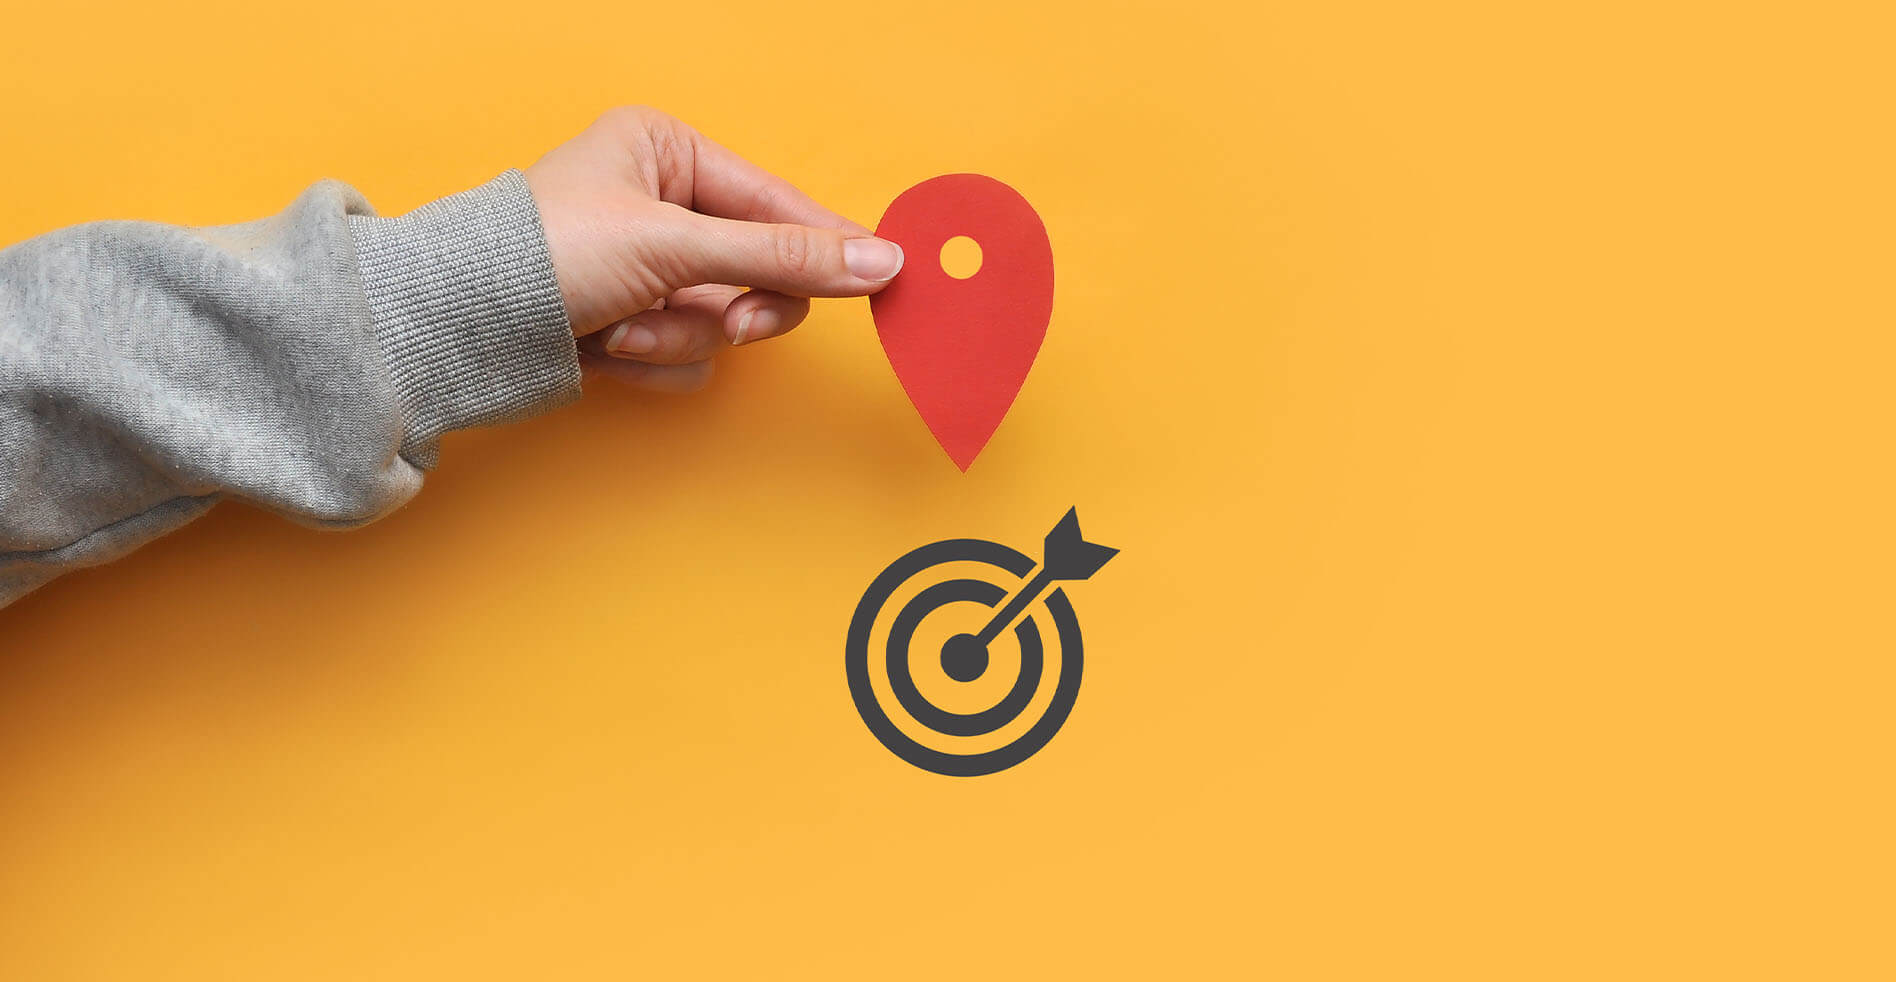 hand holding a map pin over a bullseye to illustrate geofencing